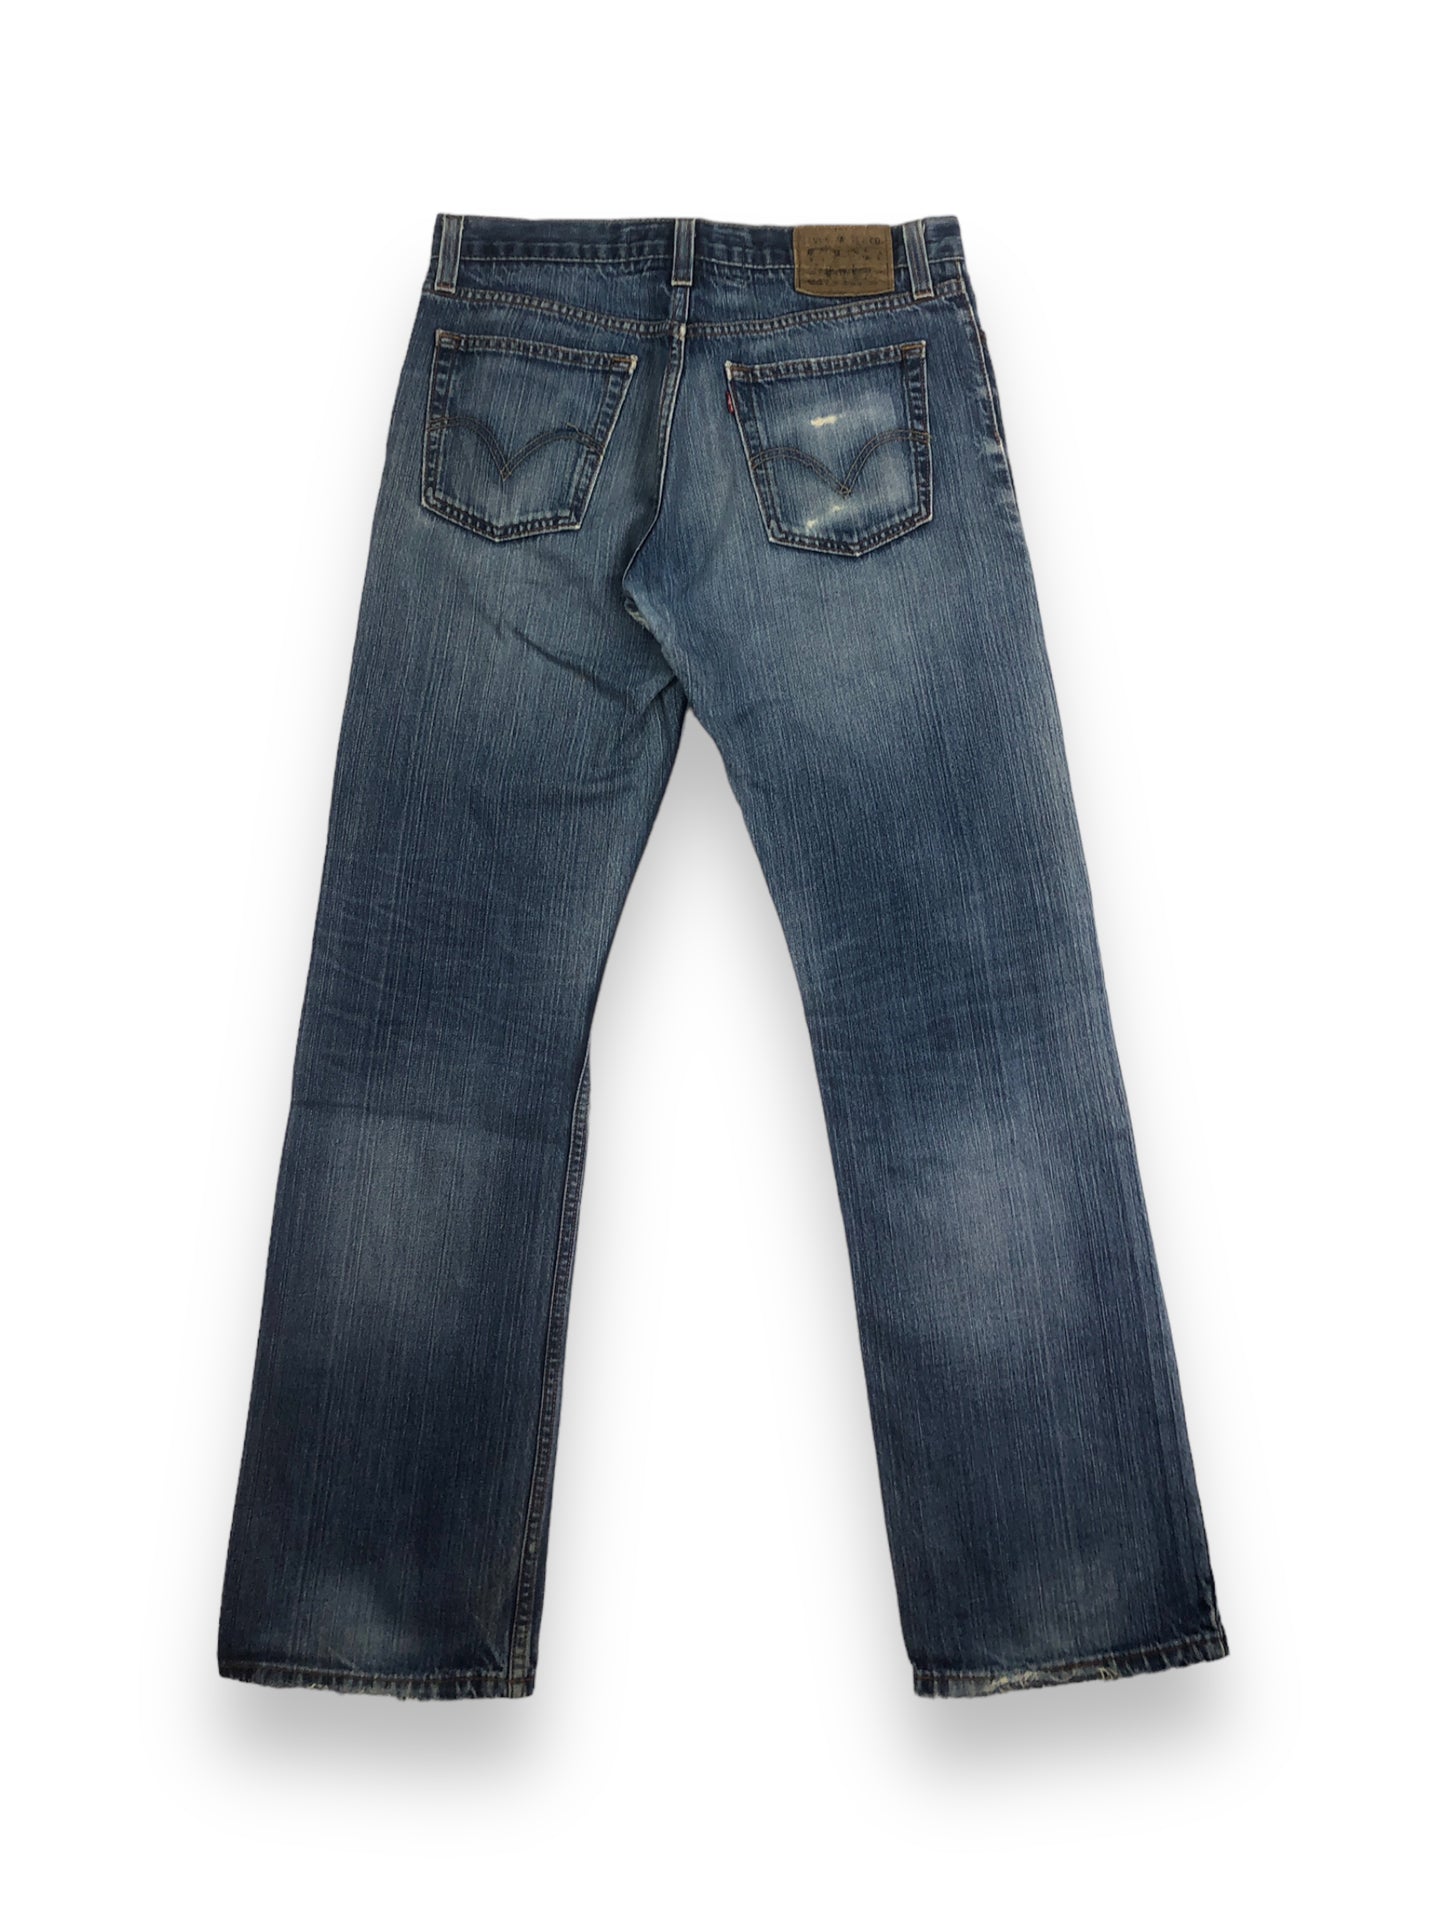 Levis 514 Straight Jeans